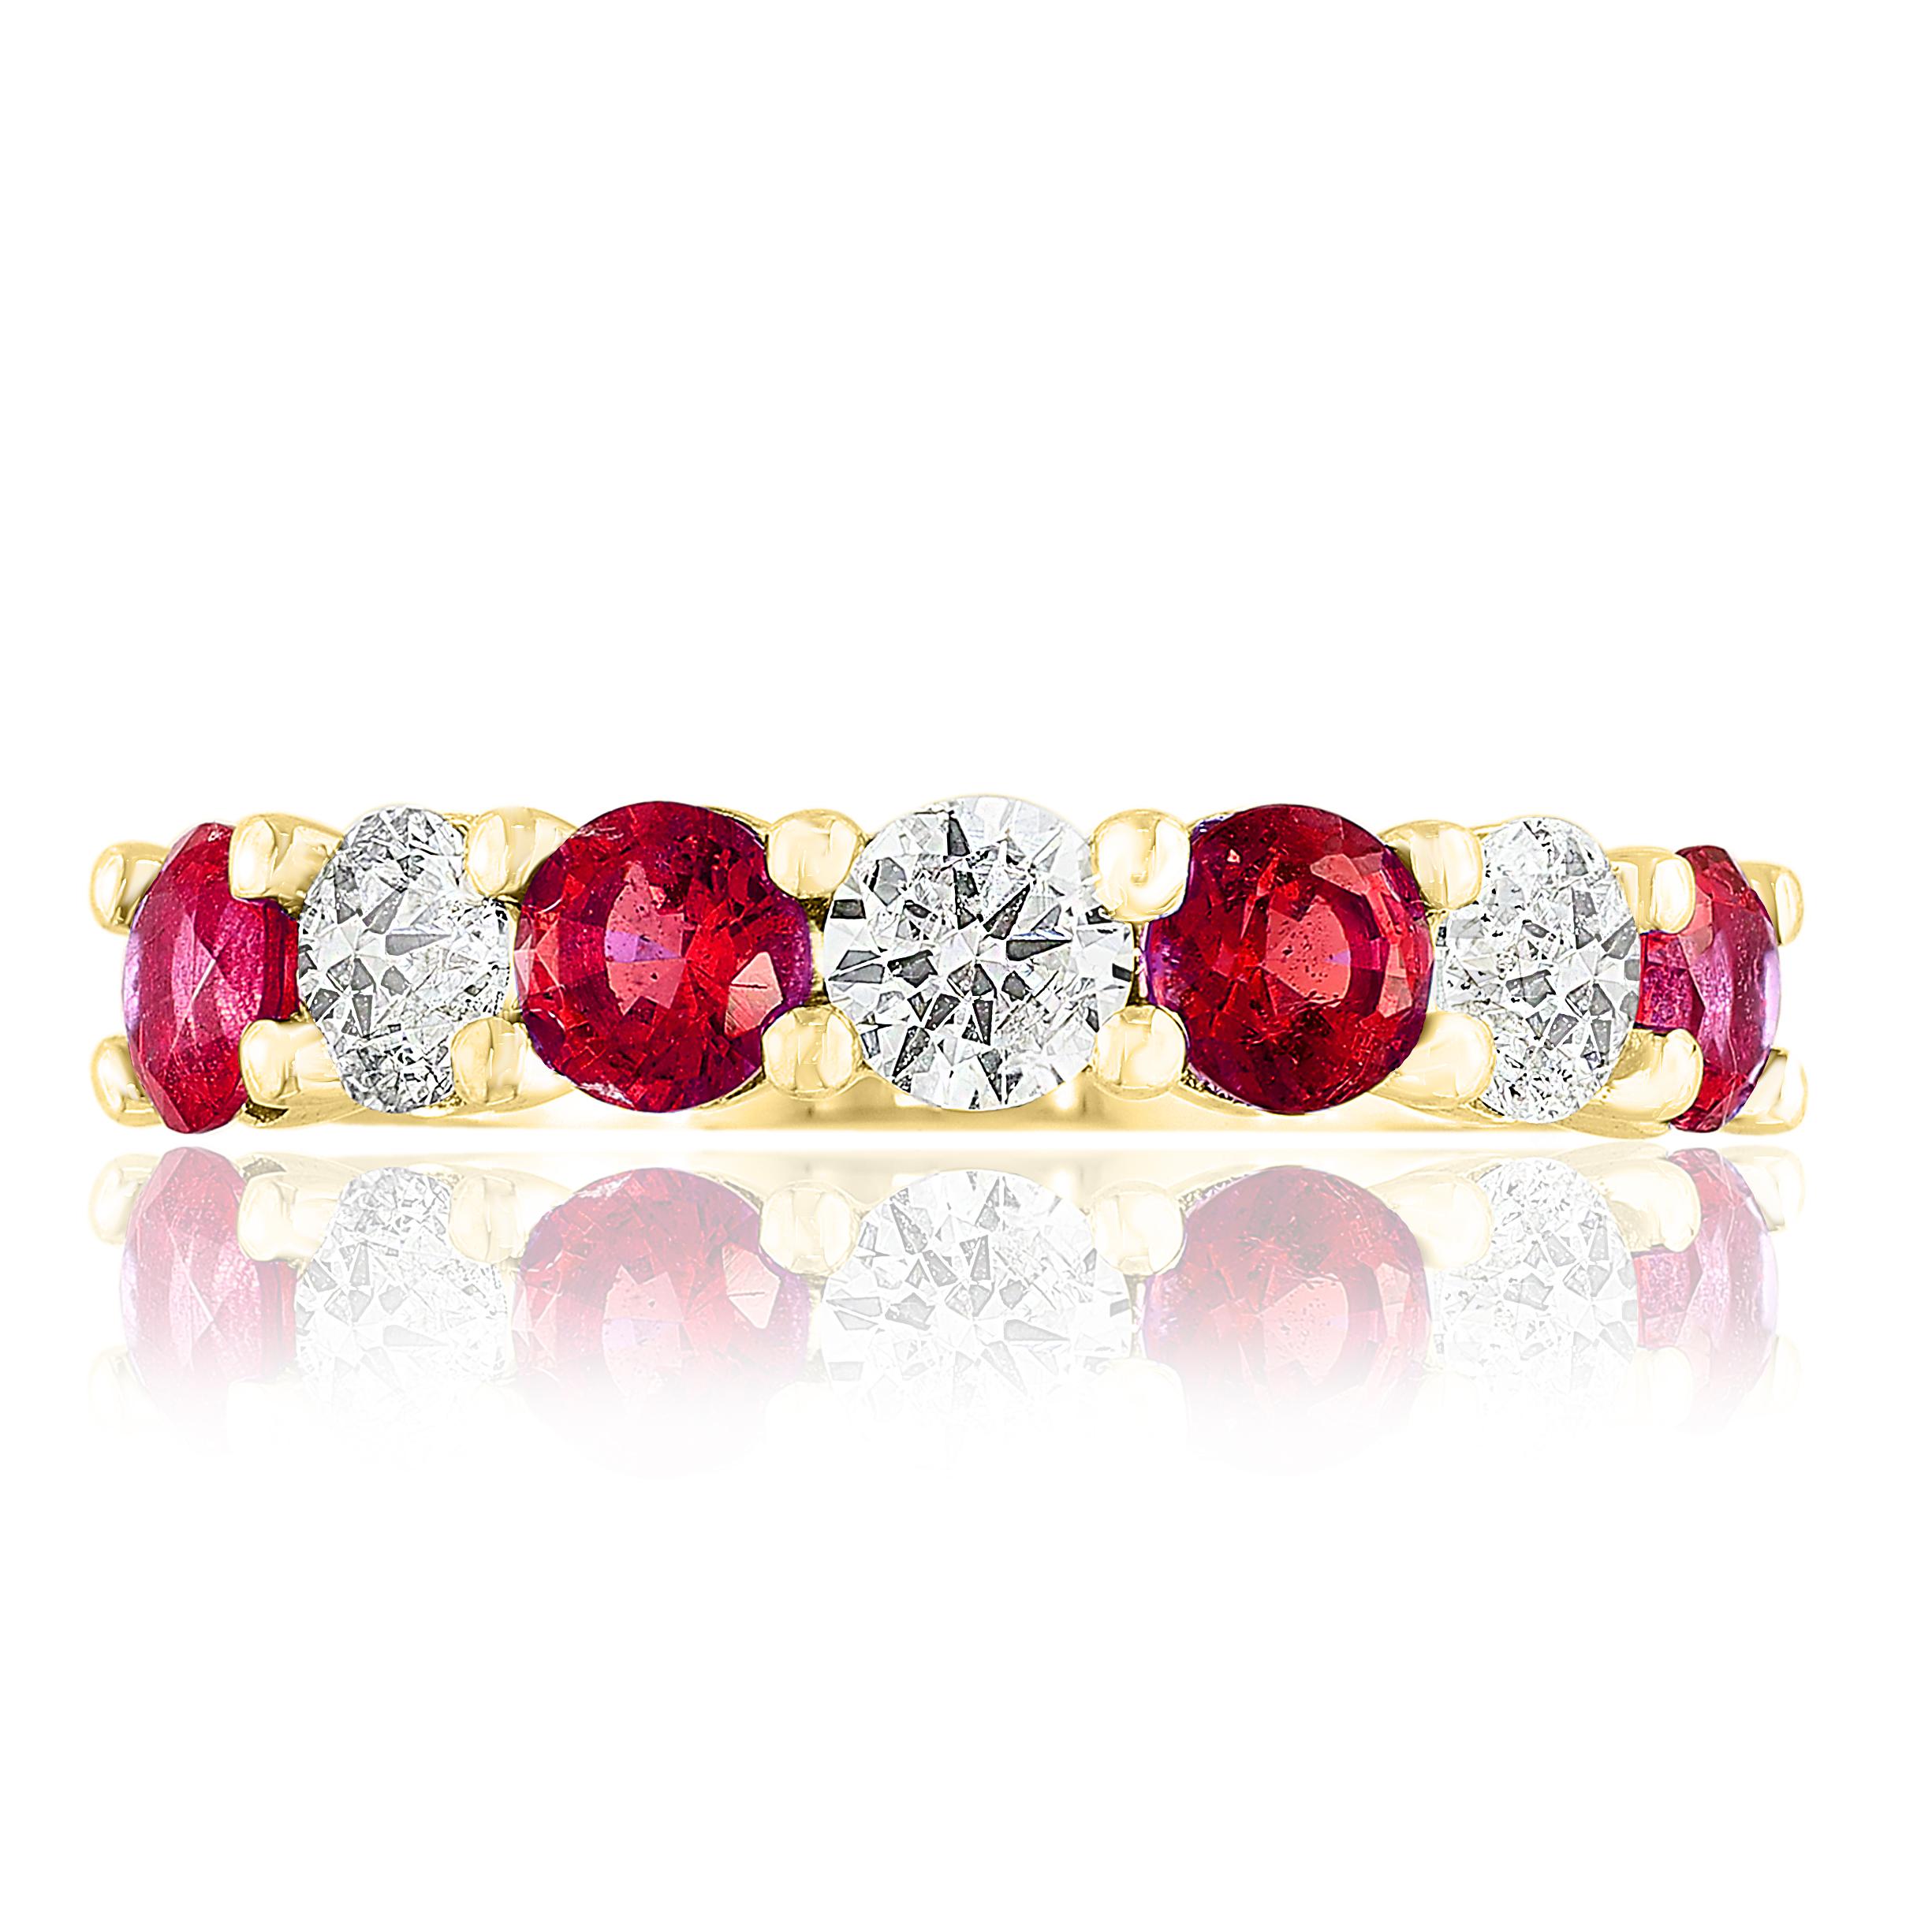 A fashionable and classic wedding band showcasing 4 color-rich red rubies weighing 1.40 carats total that alternate with 3 brilliant round diamonds weighing 0.73 carats total. Stones are secured with a shared prong setting made with 14 karats yellow